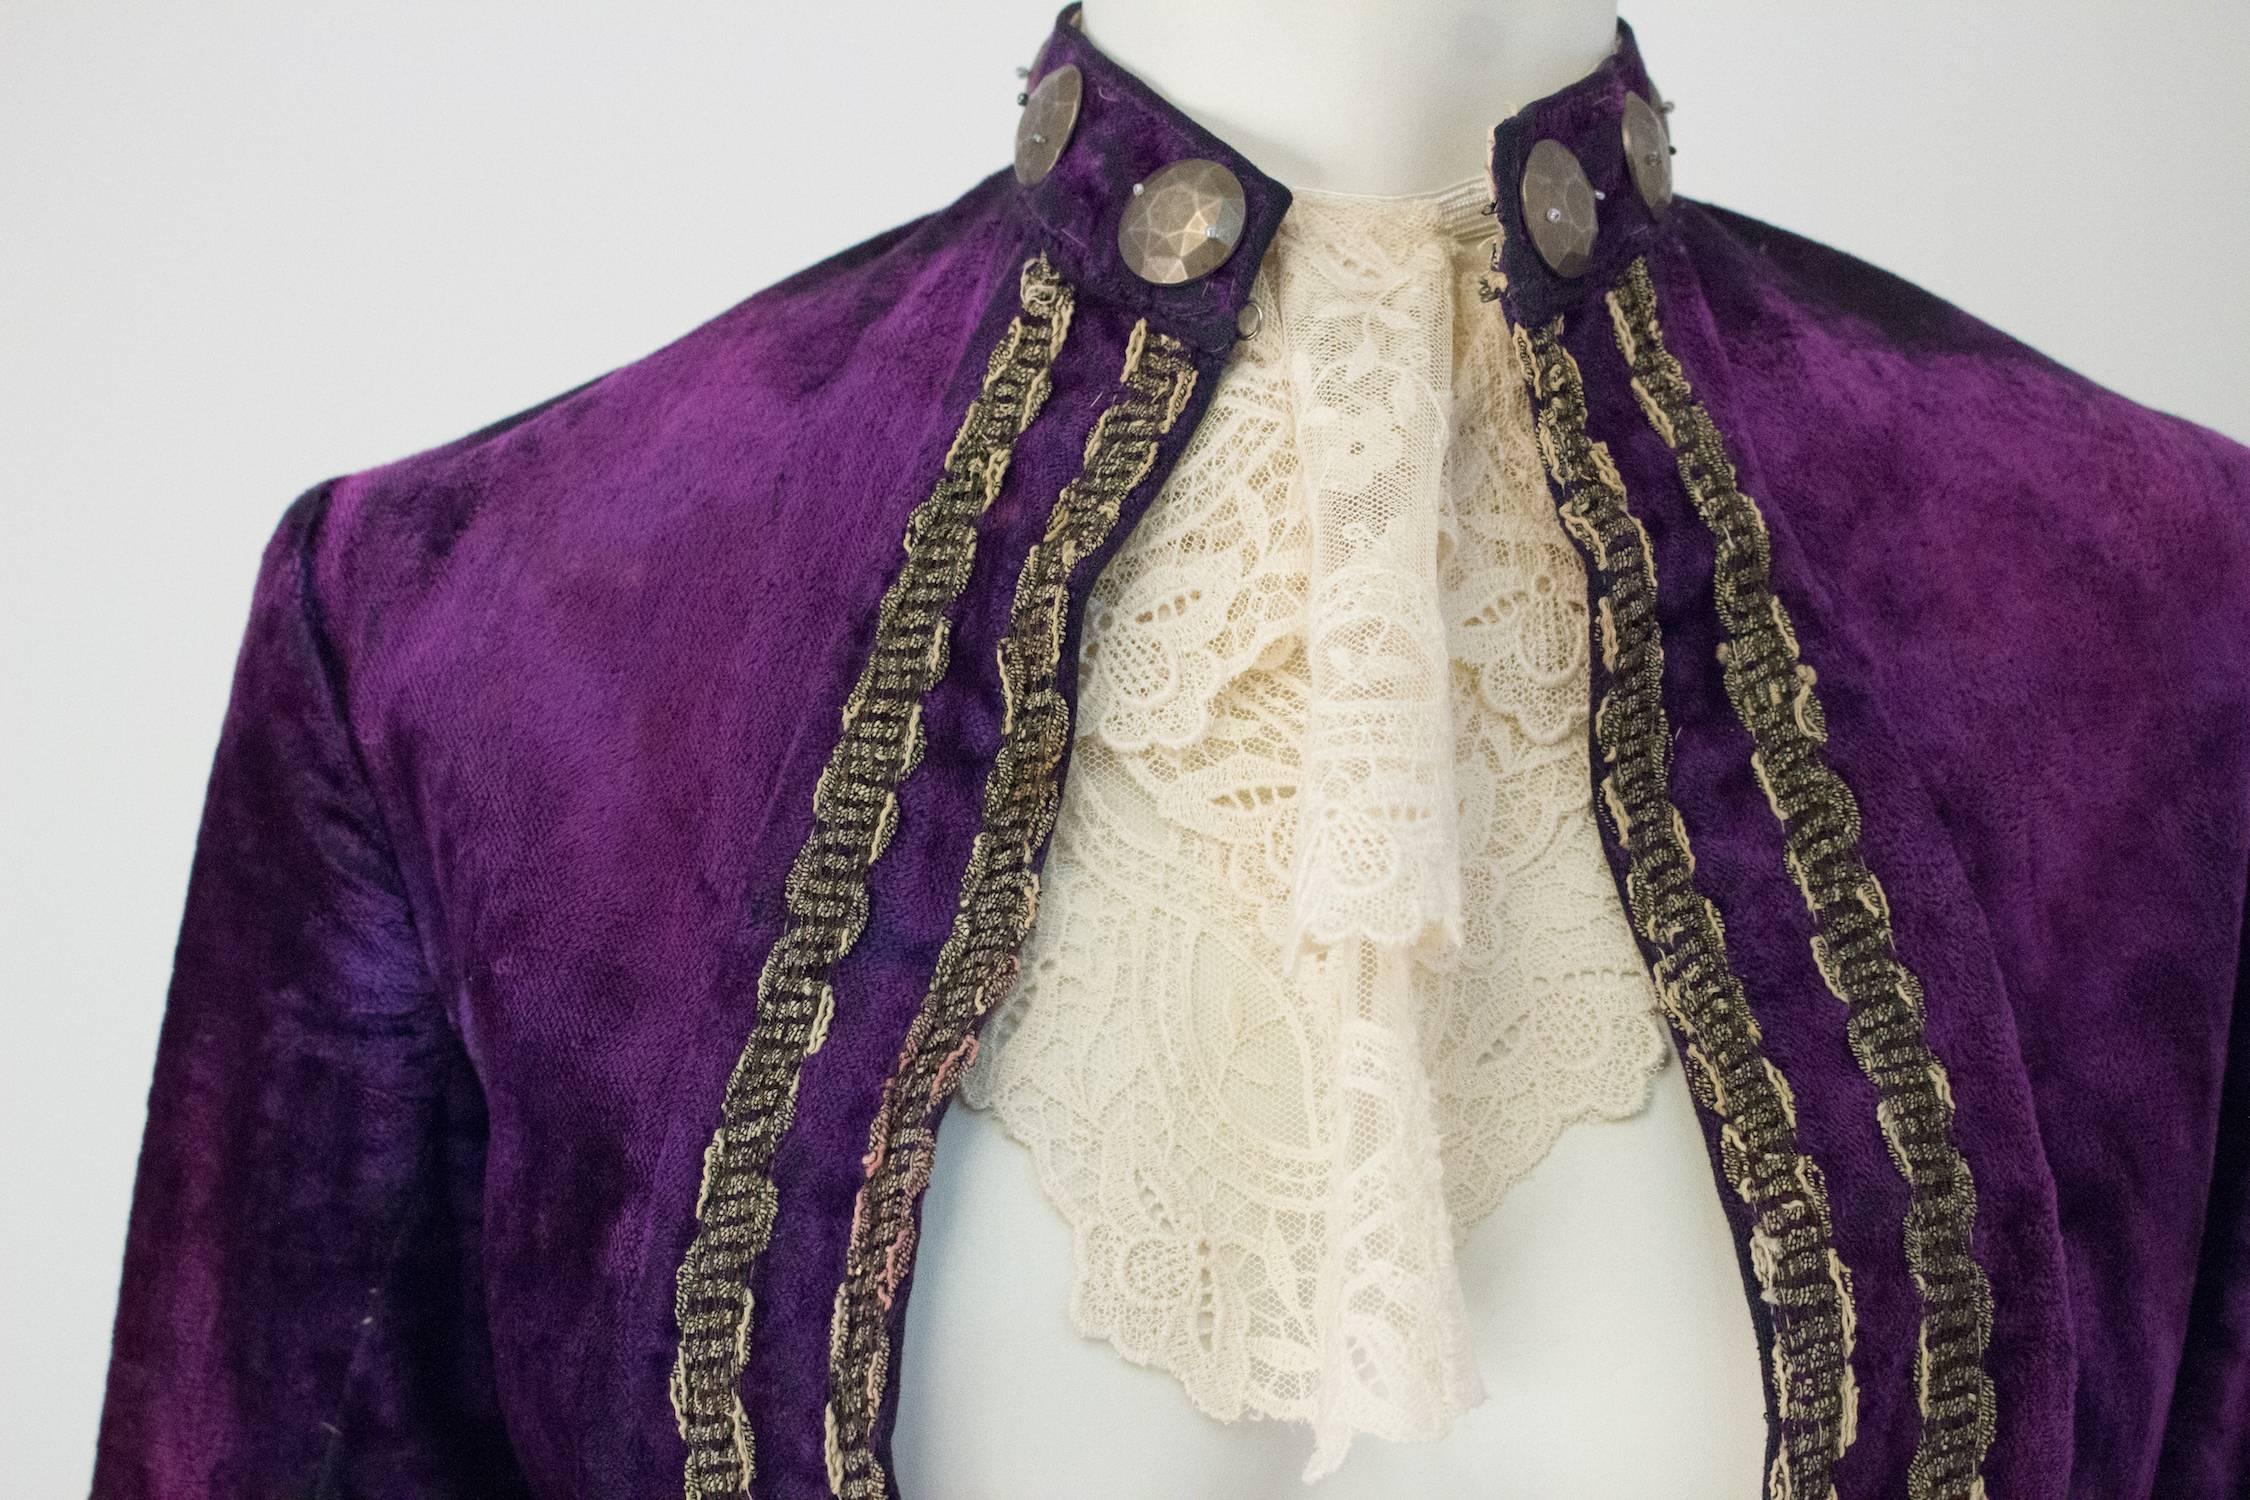 Edwardian Purple Velvet Louis XIV Pirate Prince Jacket with Jabot. Silver metallic trim throughout. Silver toned button adornments. Front mock flap pockets. Jabot included (made recently). Velvet fabric appears to be faced in a cotton fabric.